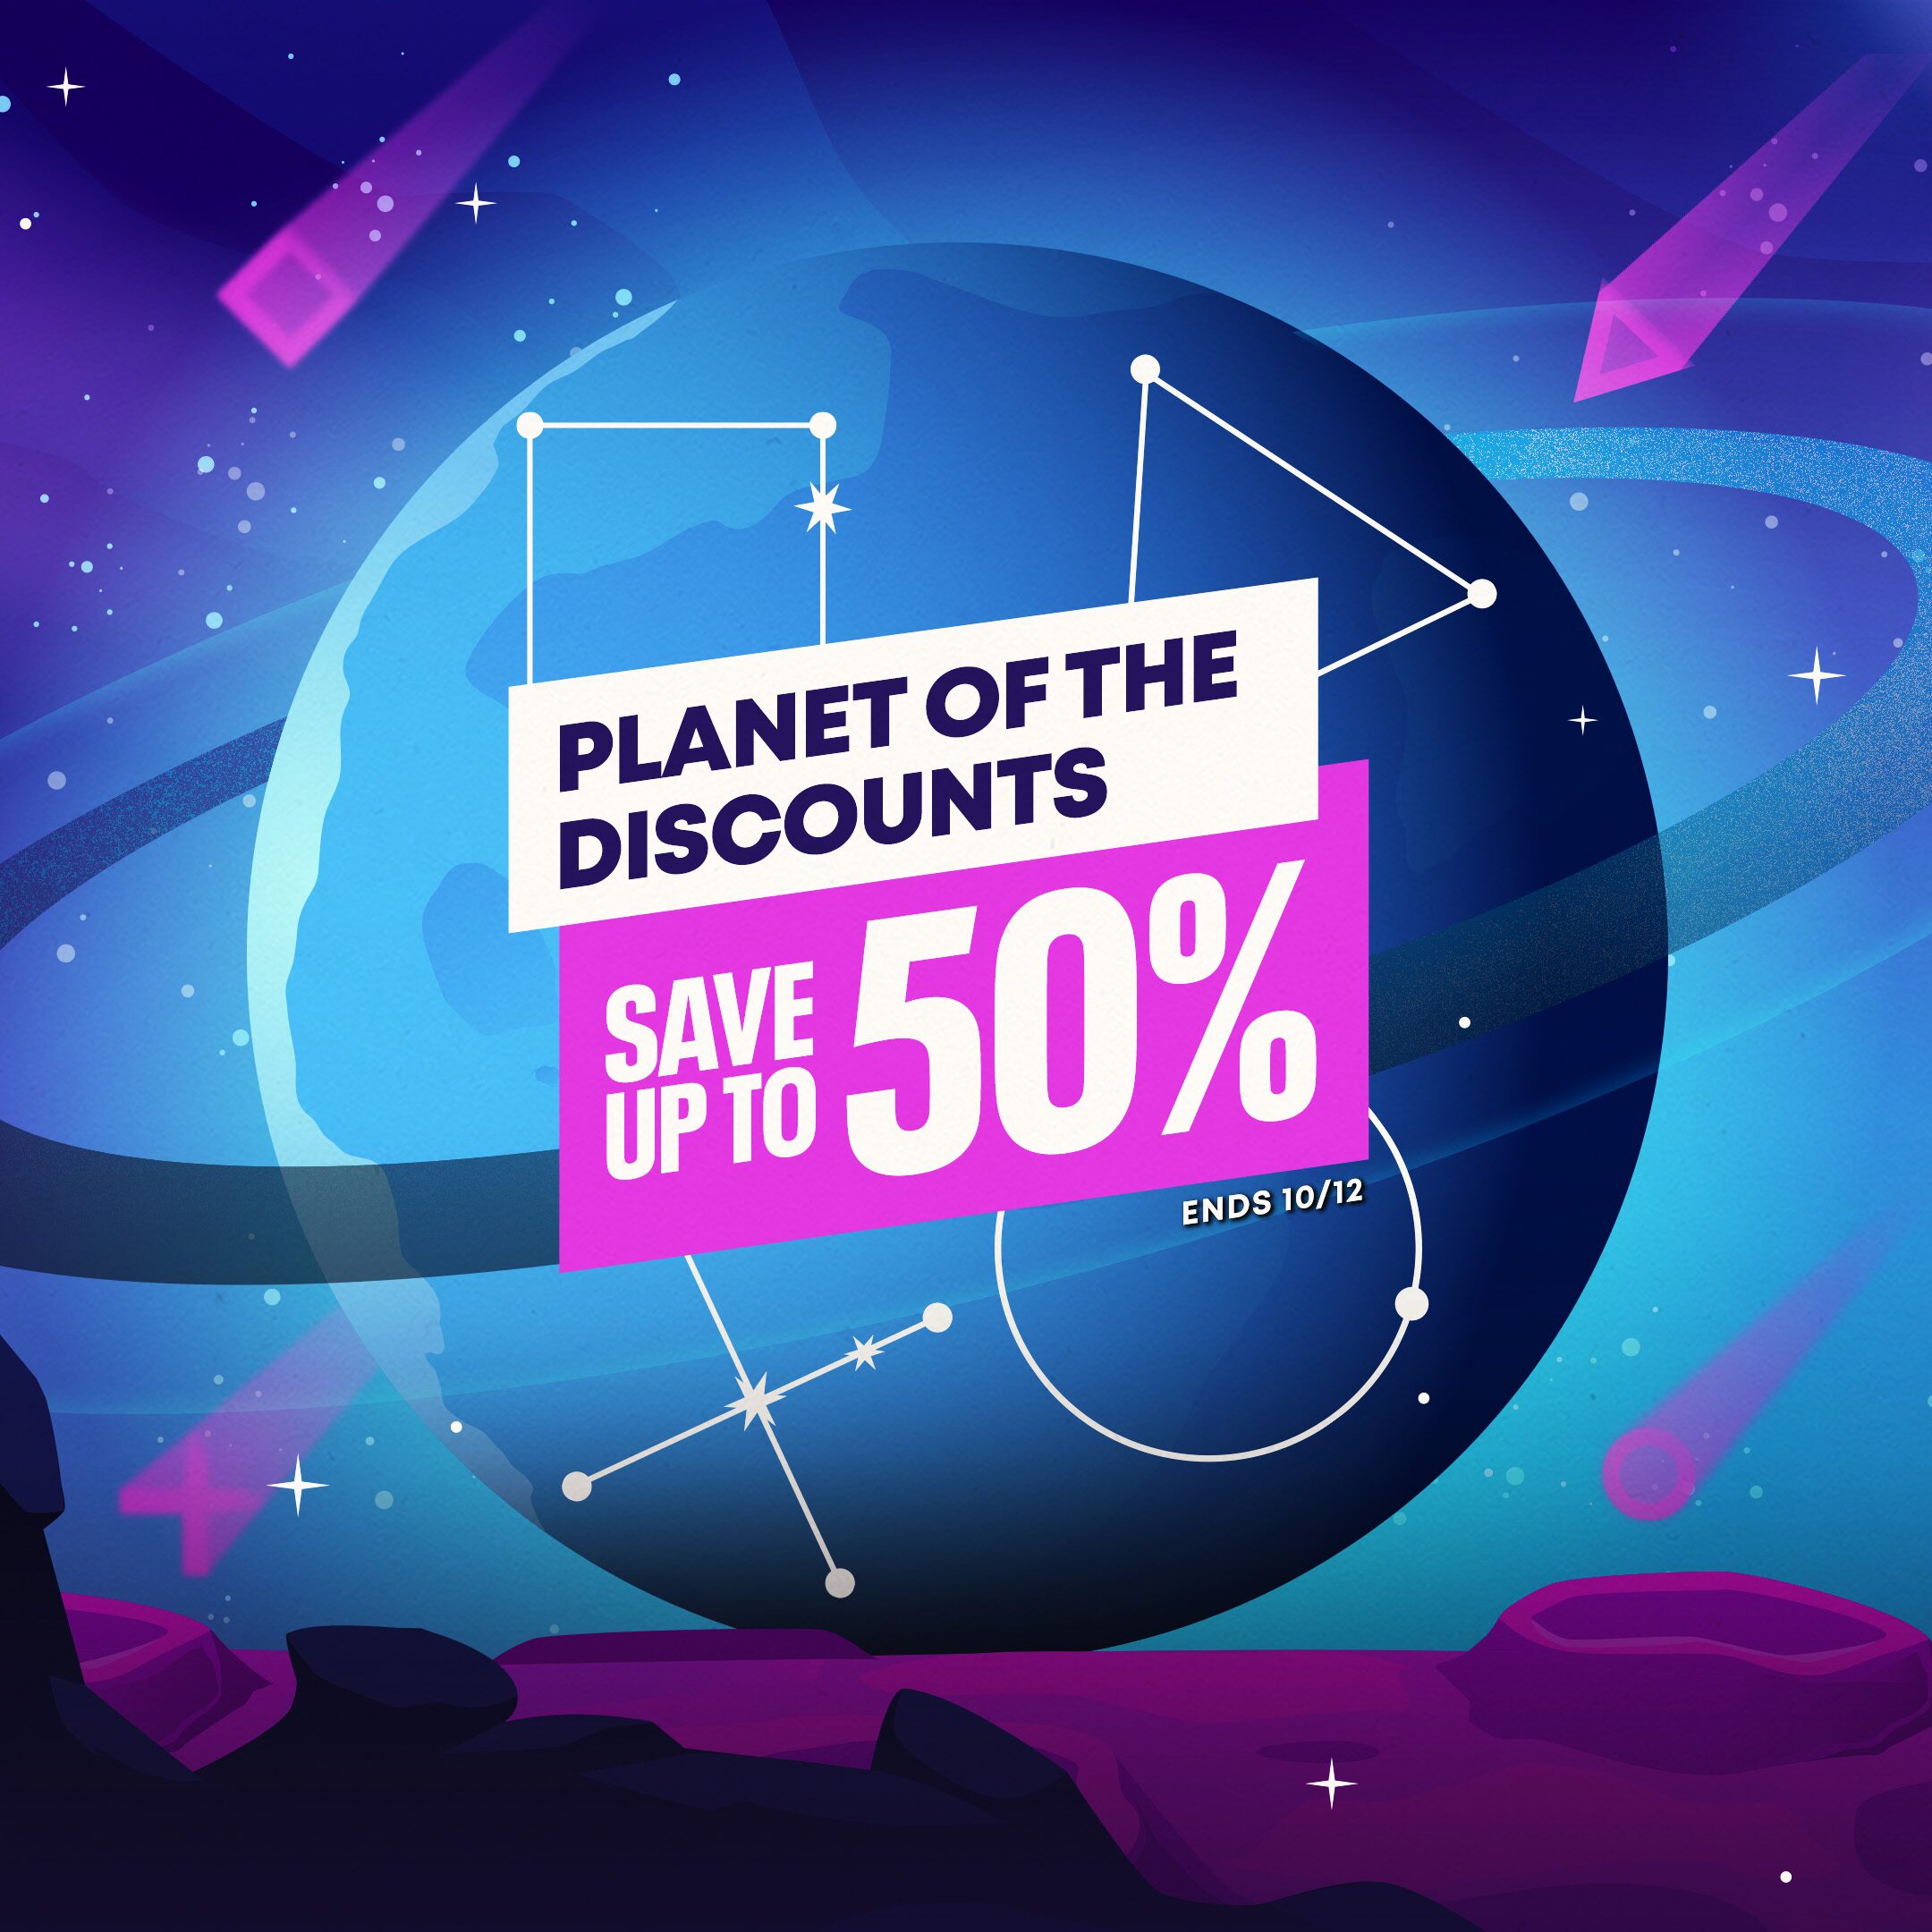 [PROMO] Planet of the Discounts - WH - B